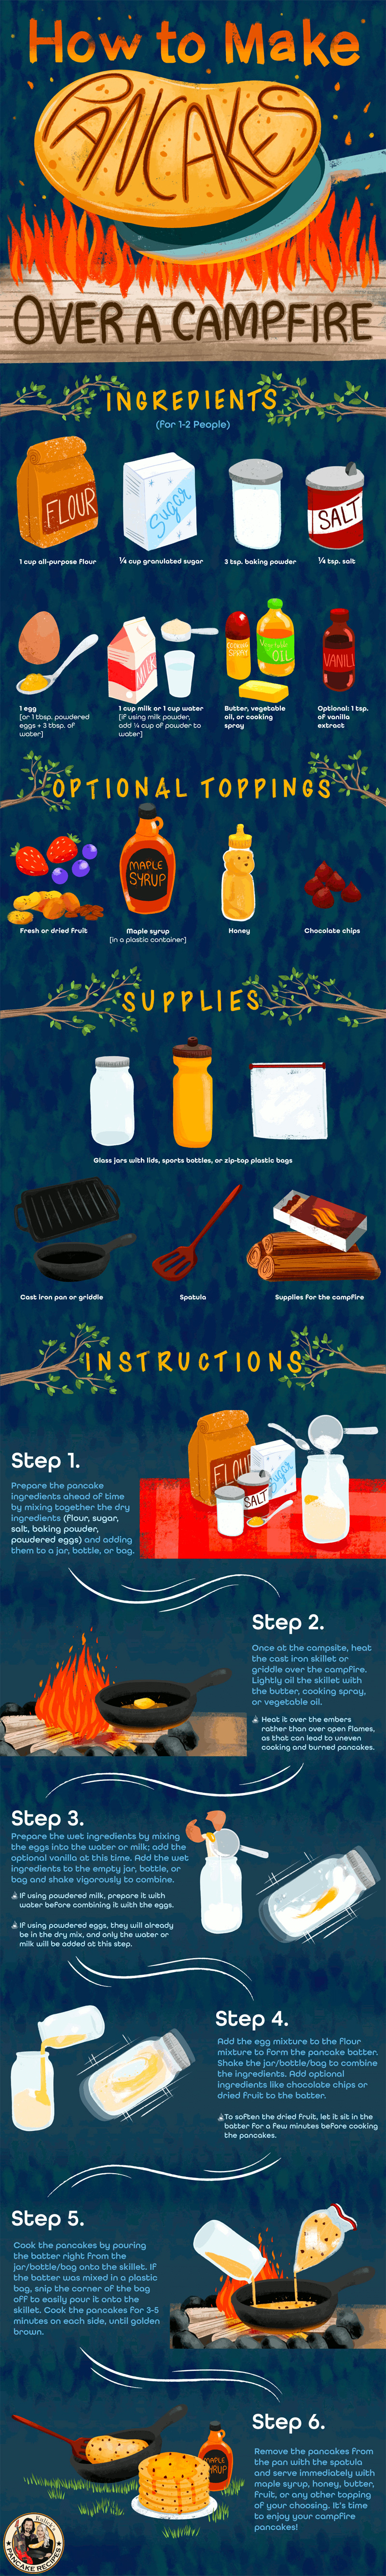 How to Make Pancakes Over a Campfire#infographic #food & drinks